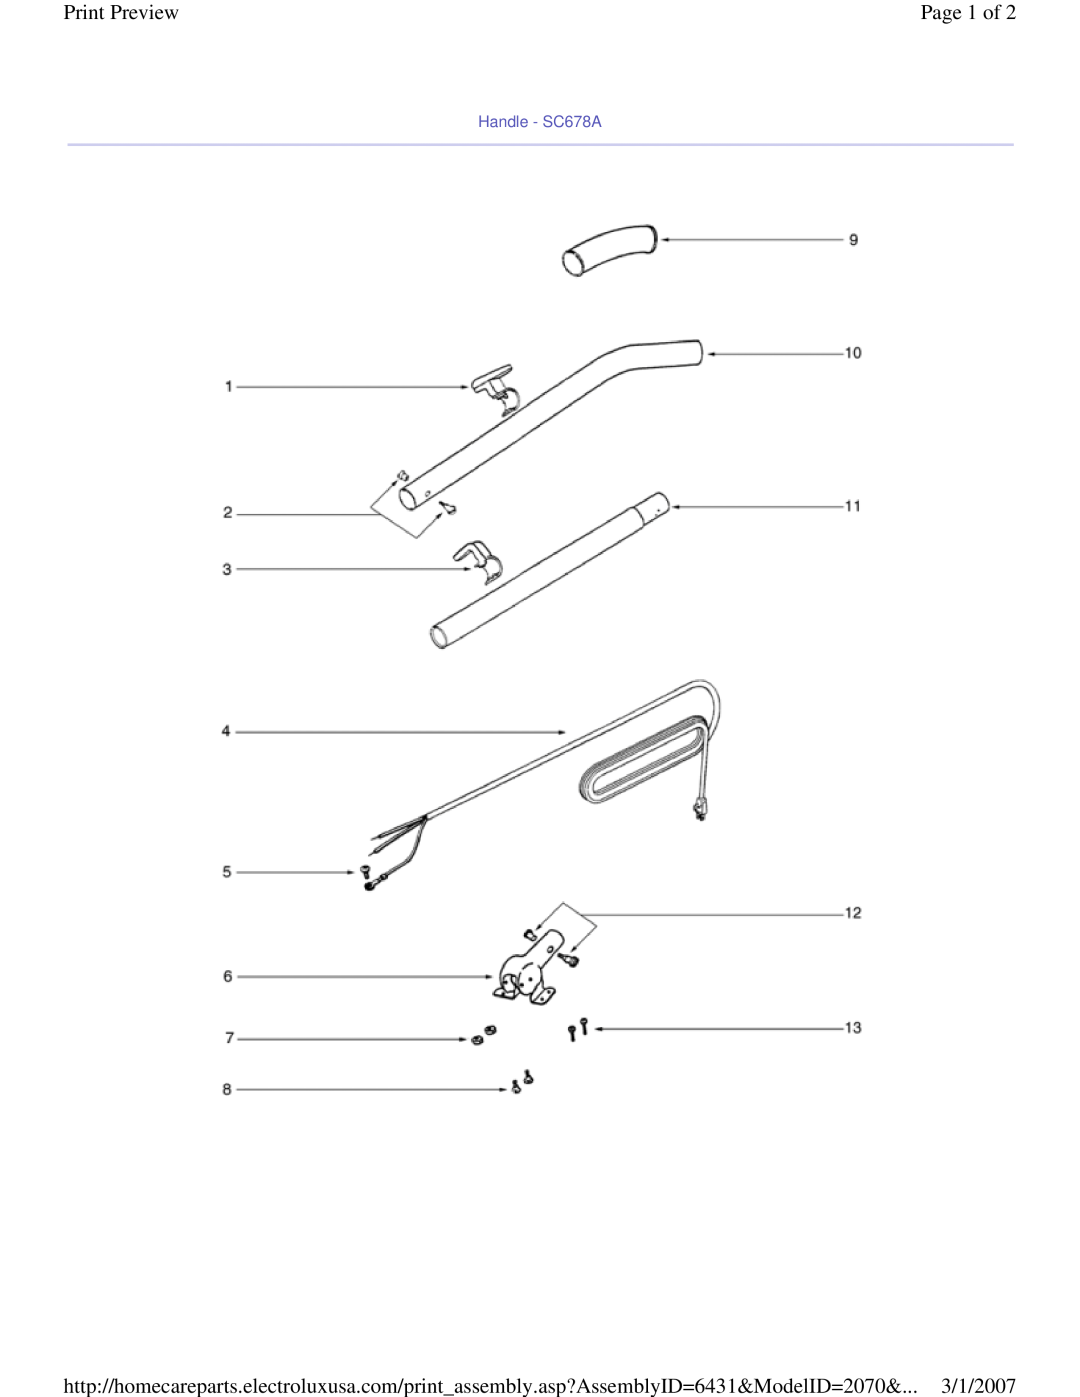 Sanitaire manual Handle - SC678A, Print Preview, Page 1 of 